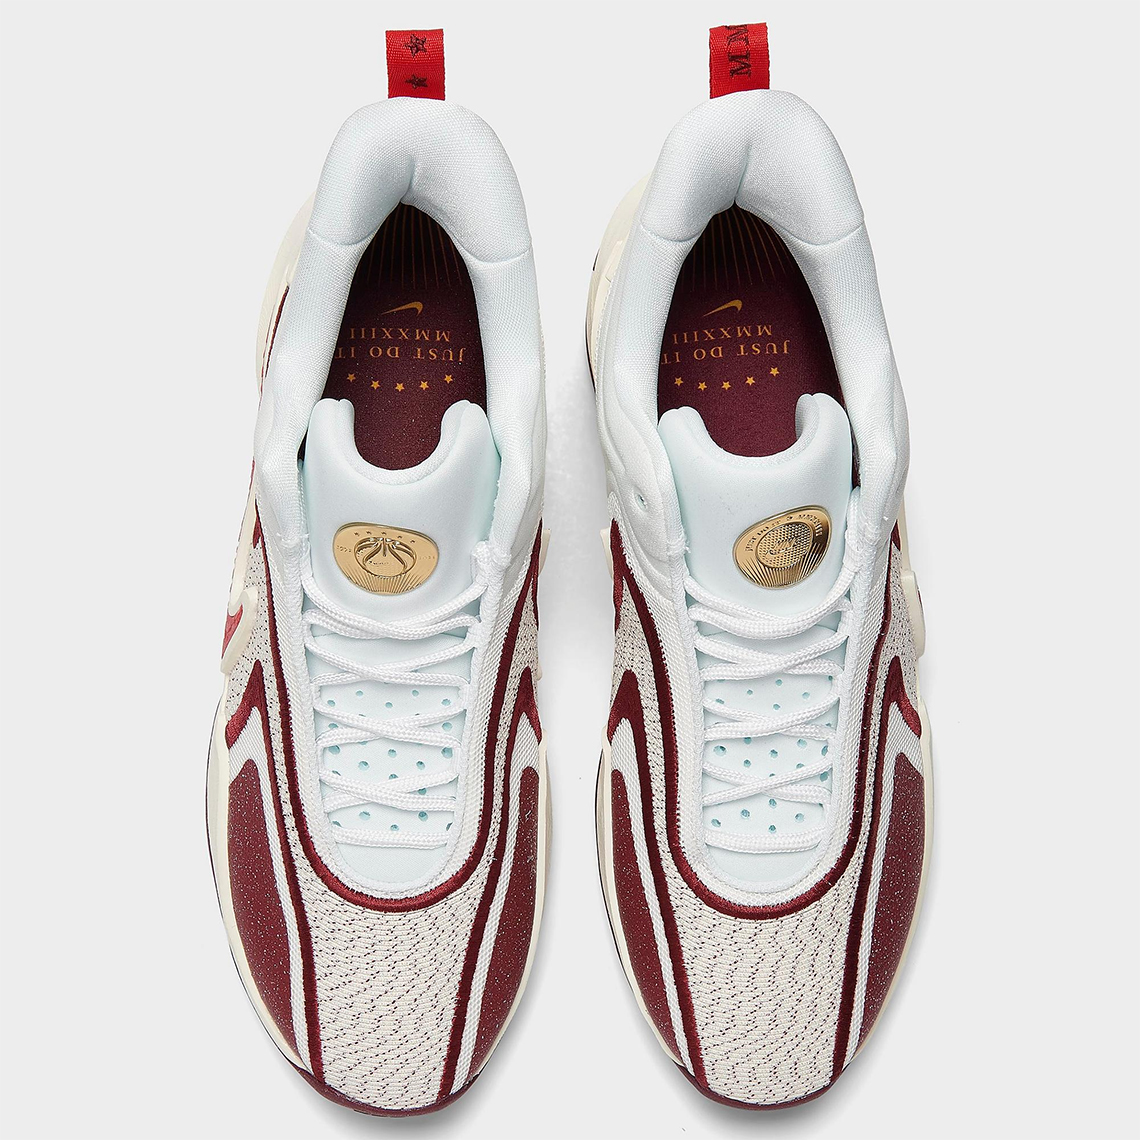 Replica Nike Low Walk of Fame 504750-076 Coconut Milk Team Red Summit White Dh1537 102 3